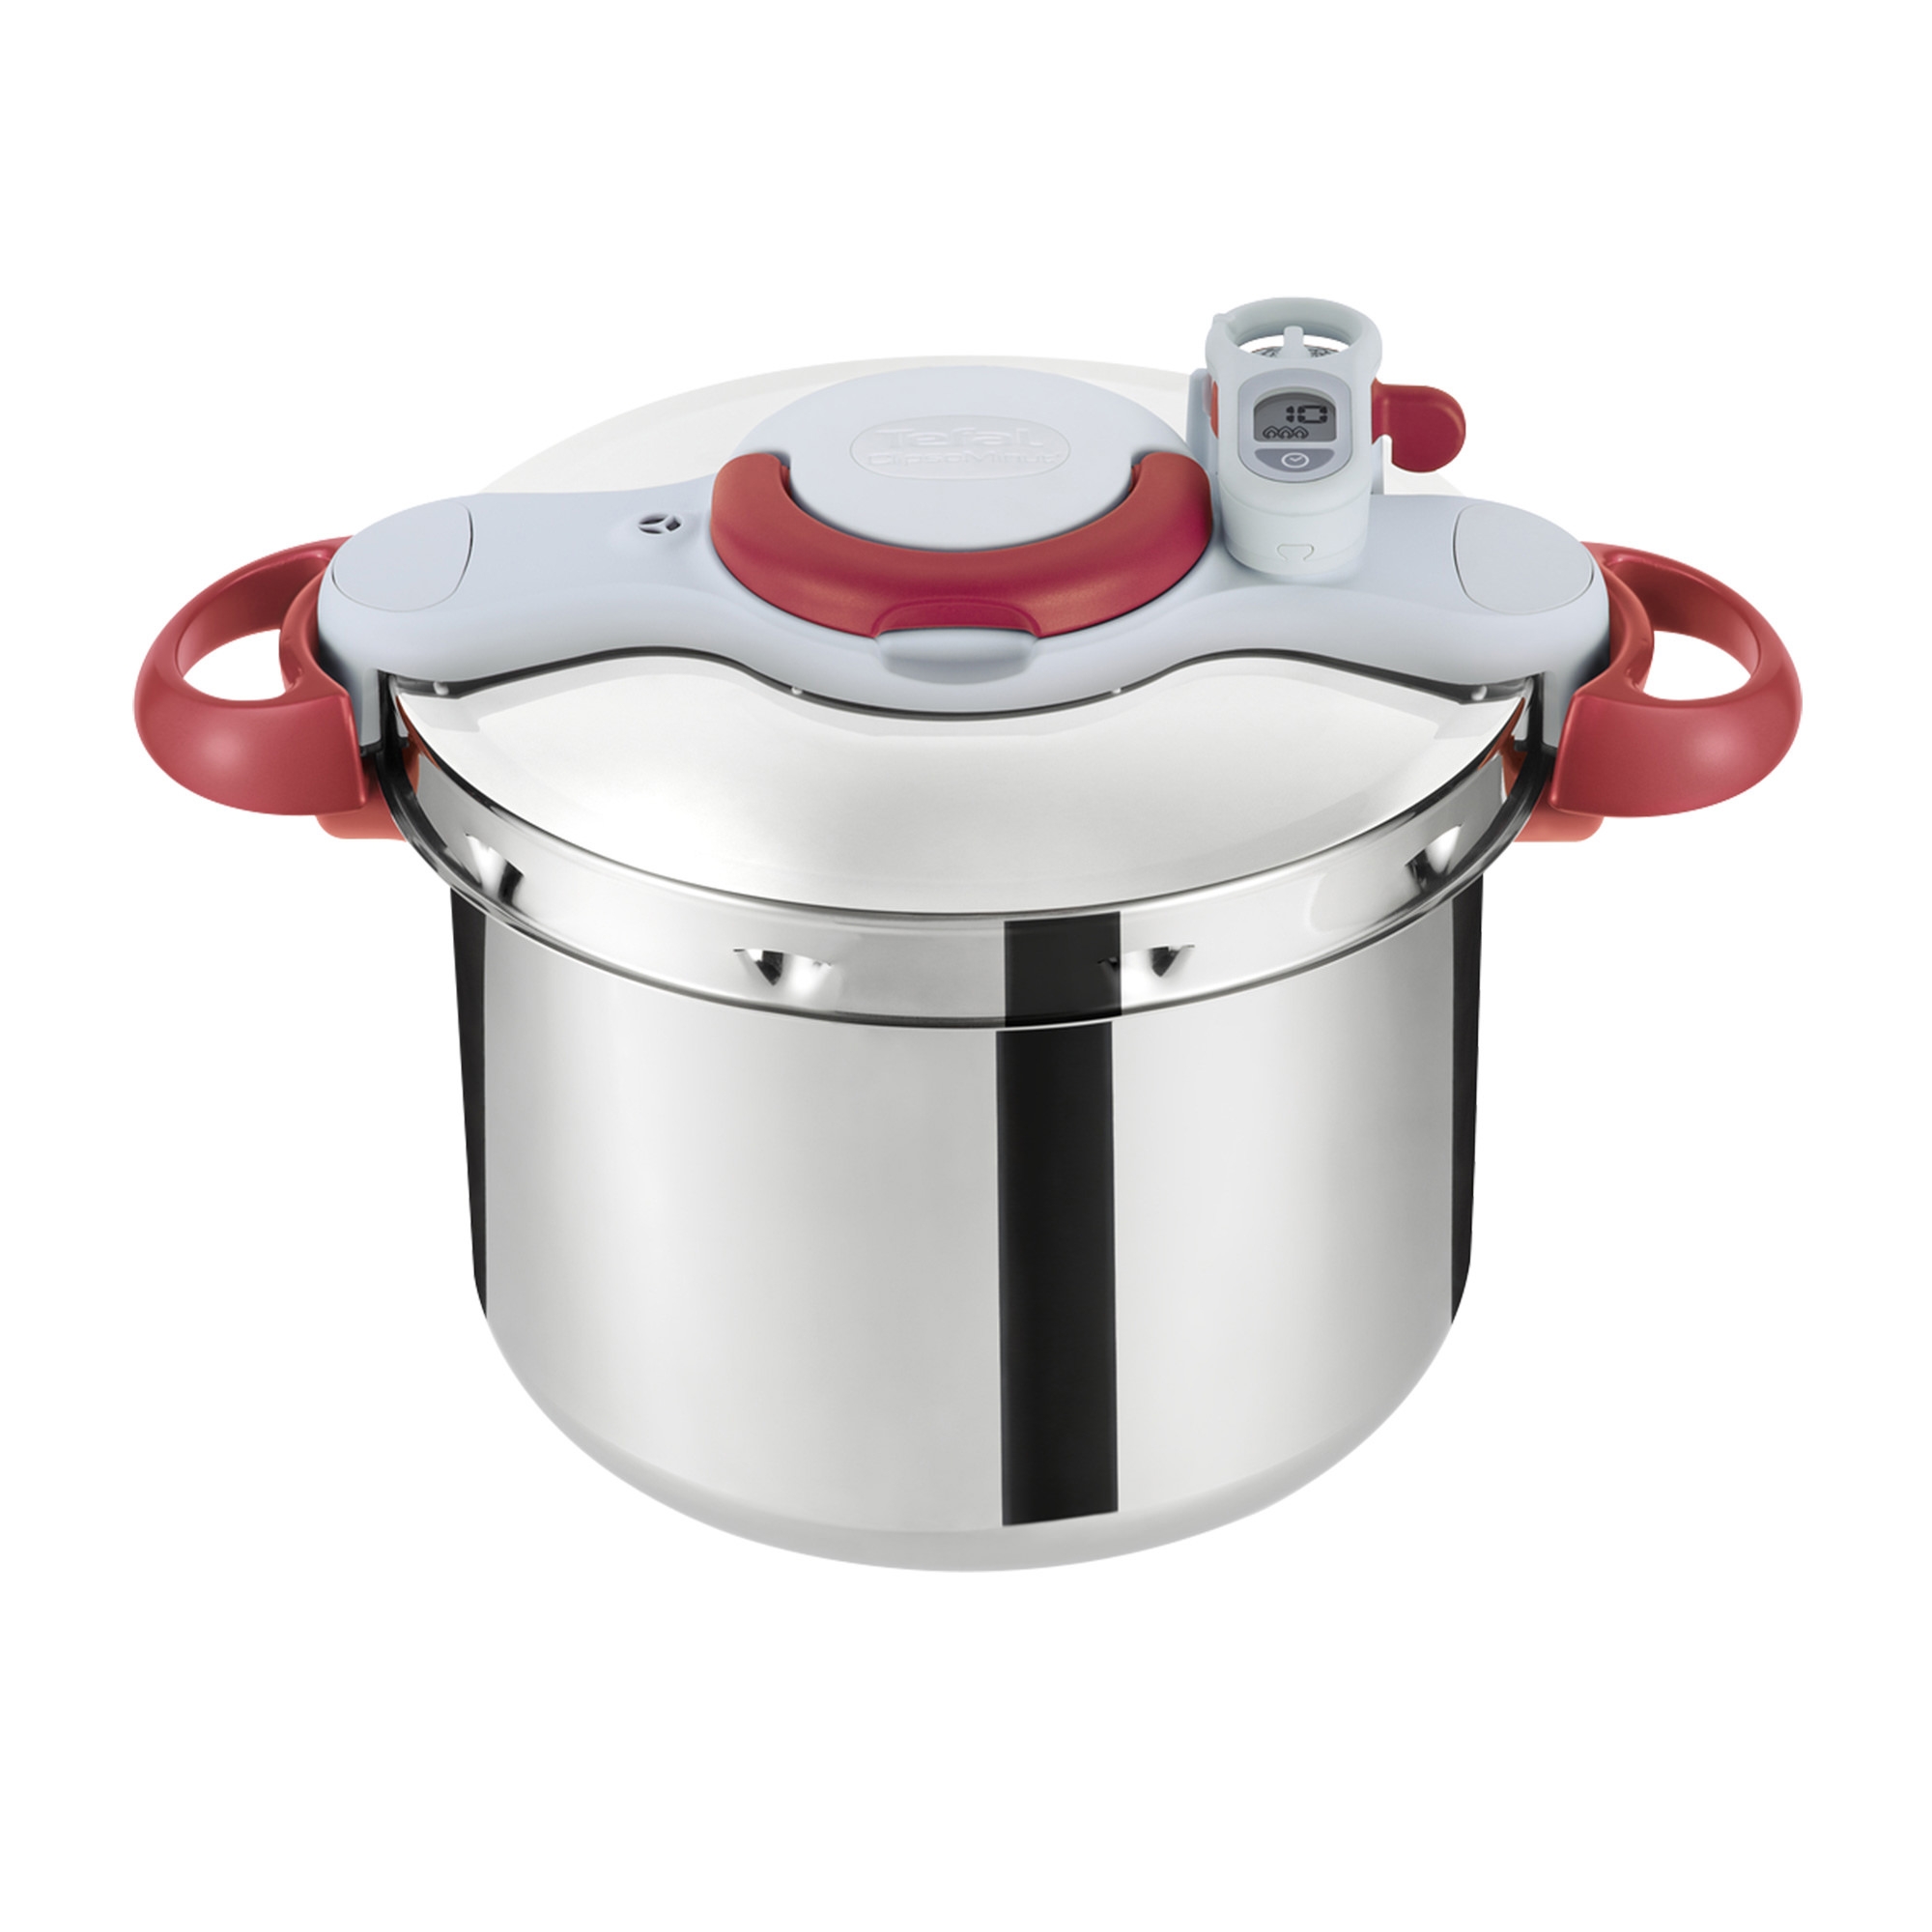 Tefal Clipso Minut Perfect Pressure Cooker 9L Image 1